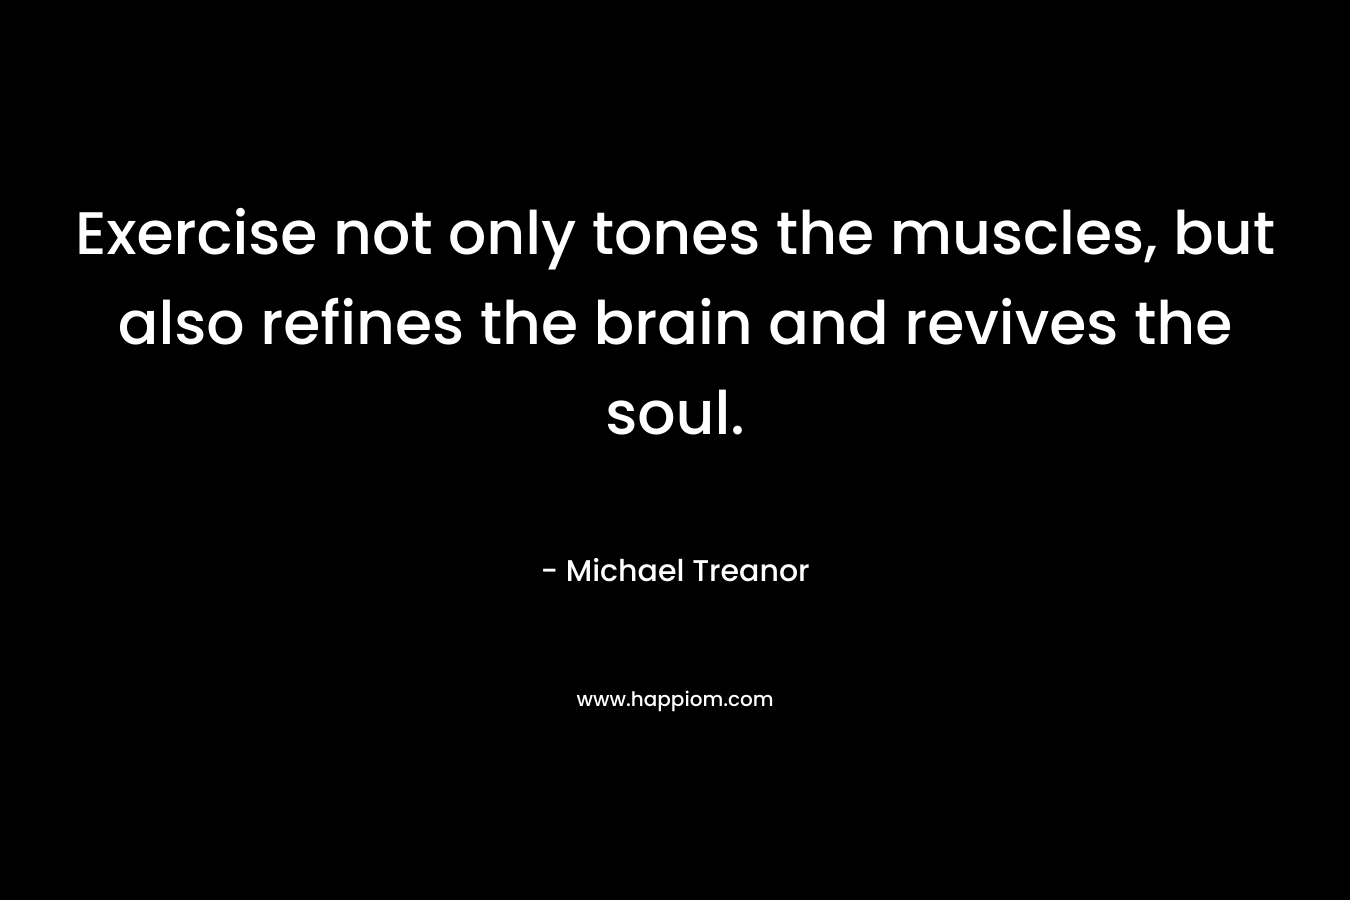 Exercise not only tones the muscles, but also refines the brain and revives the soul. – Michael Treanor